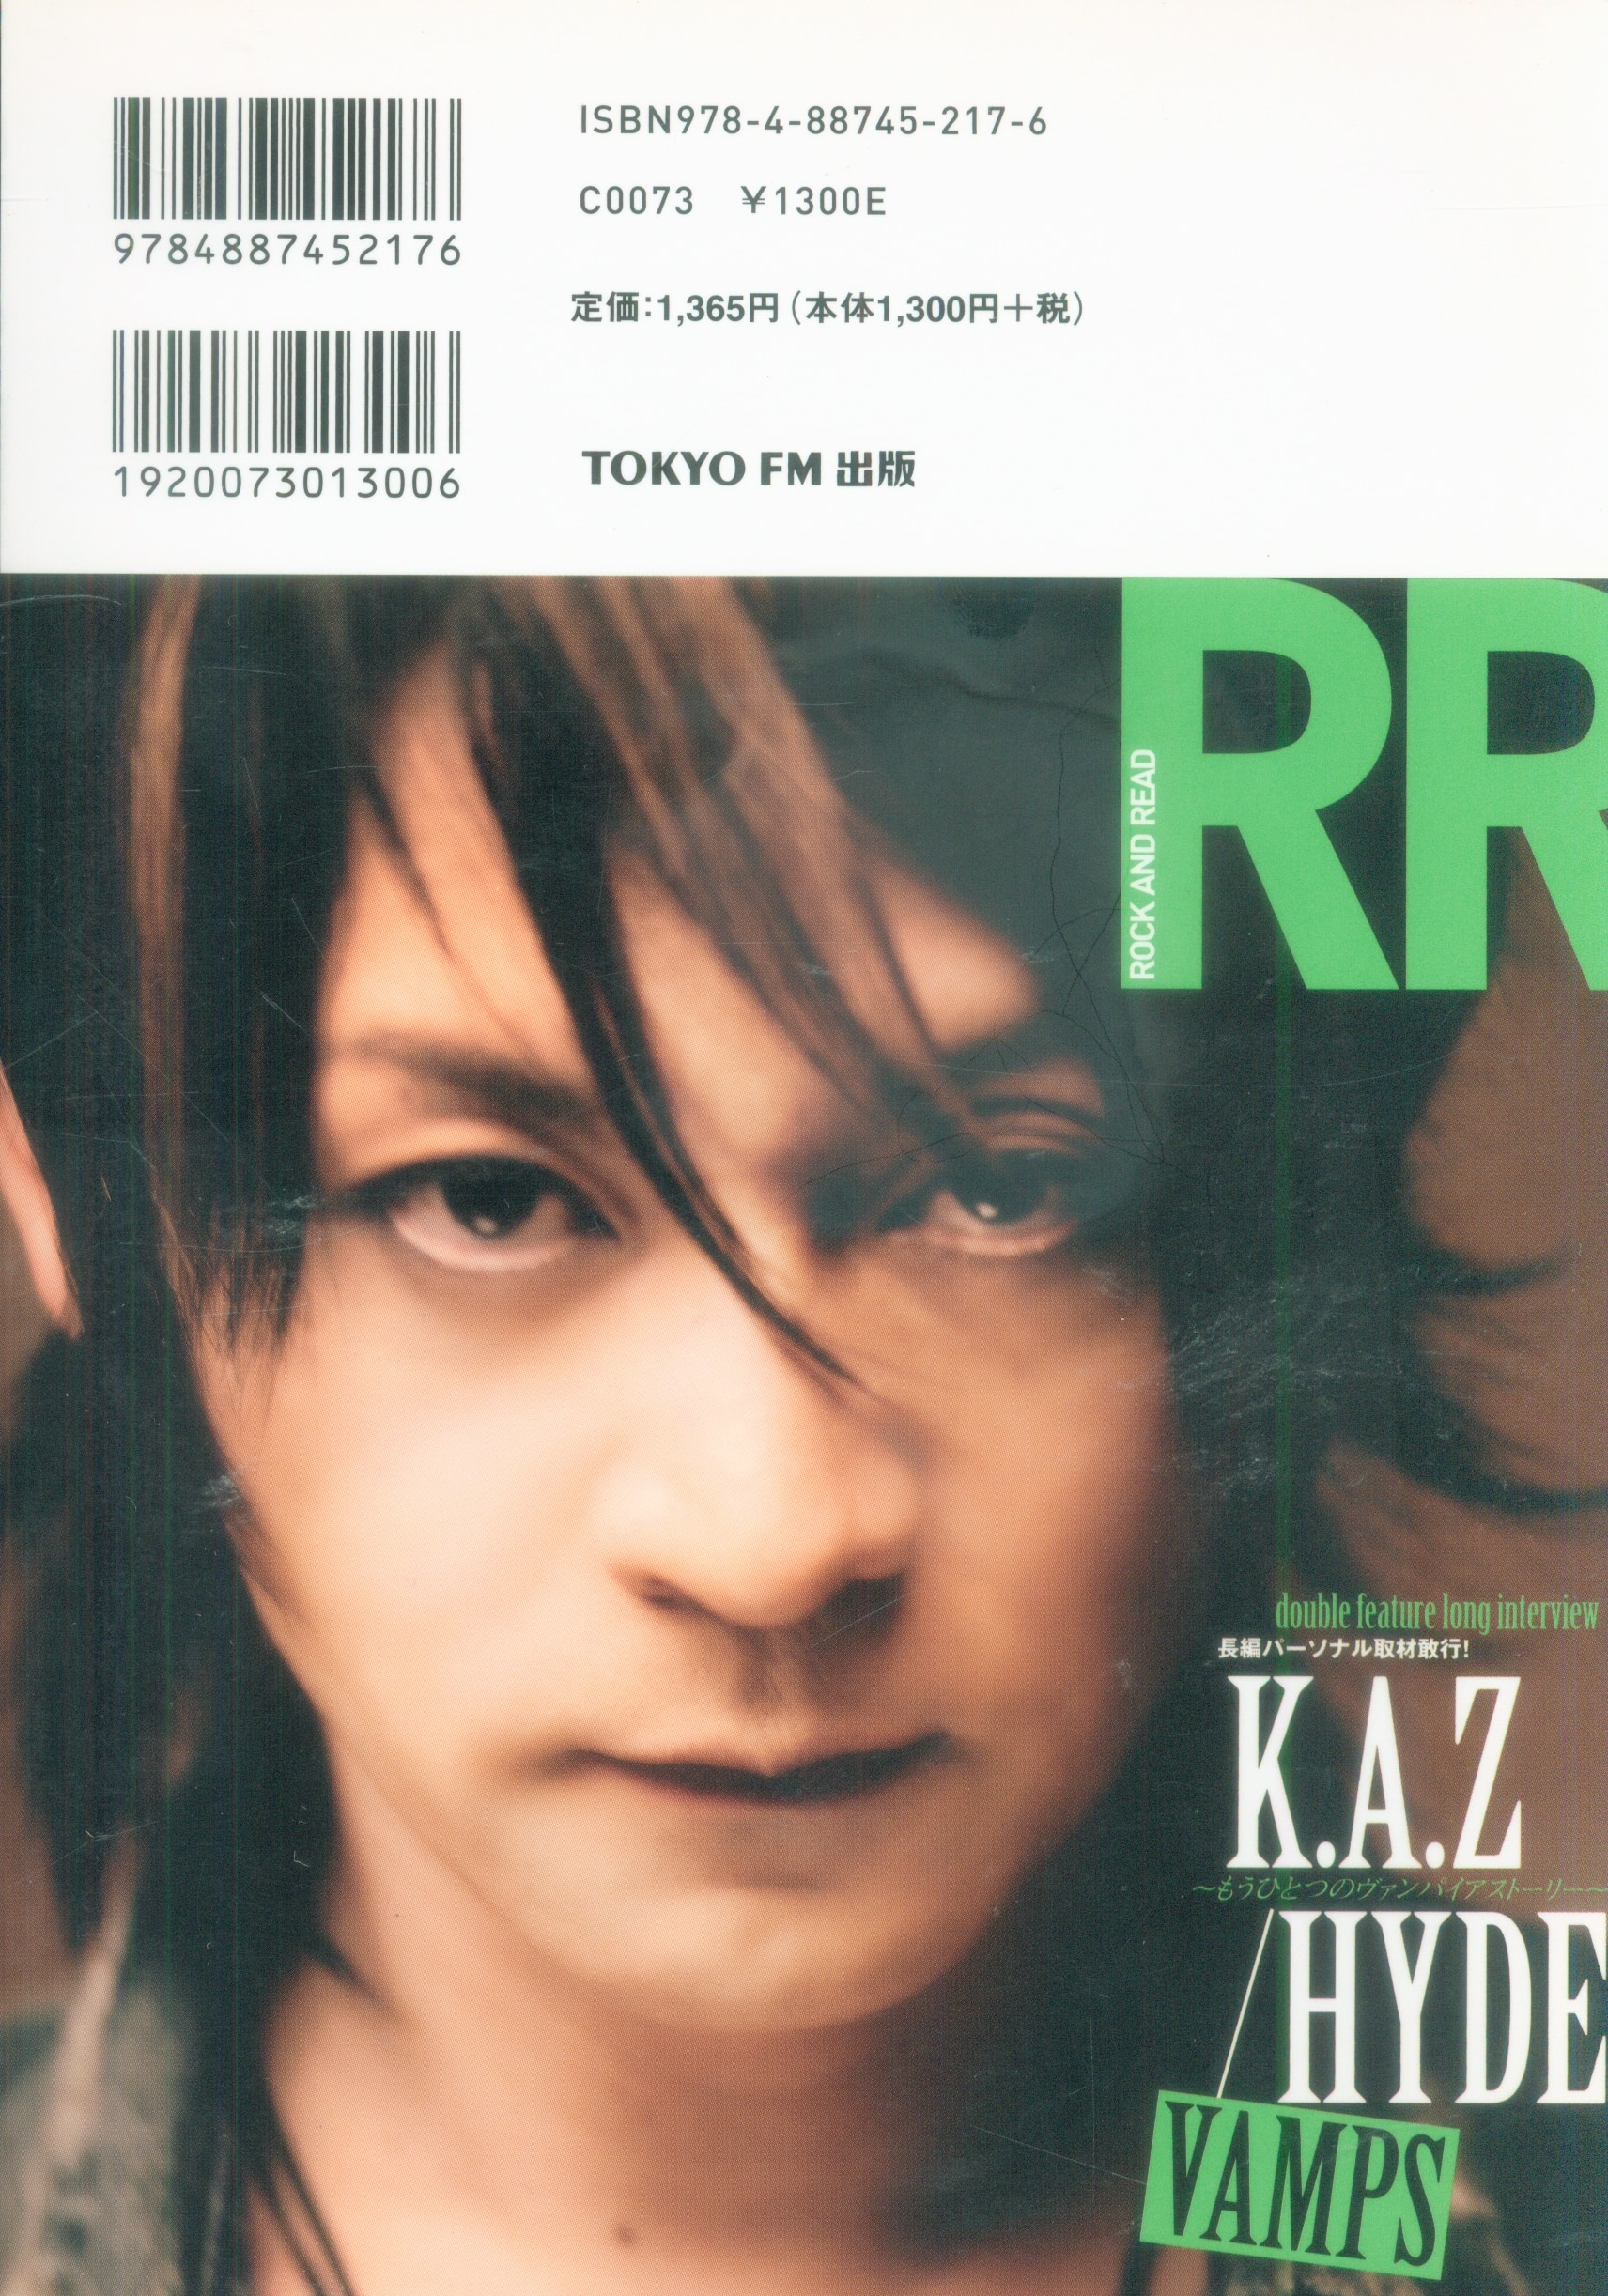 VAMPS HYDE / K.A.Z 雑誌 ROCK AND READ 025 | ありある | まんだらけ 